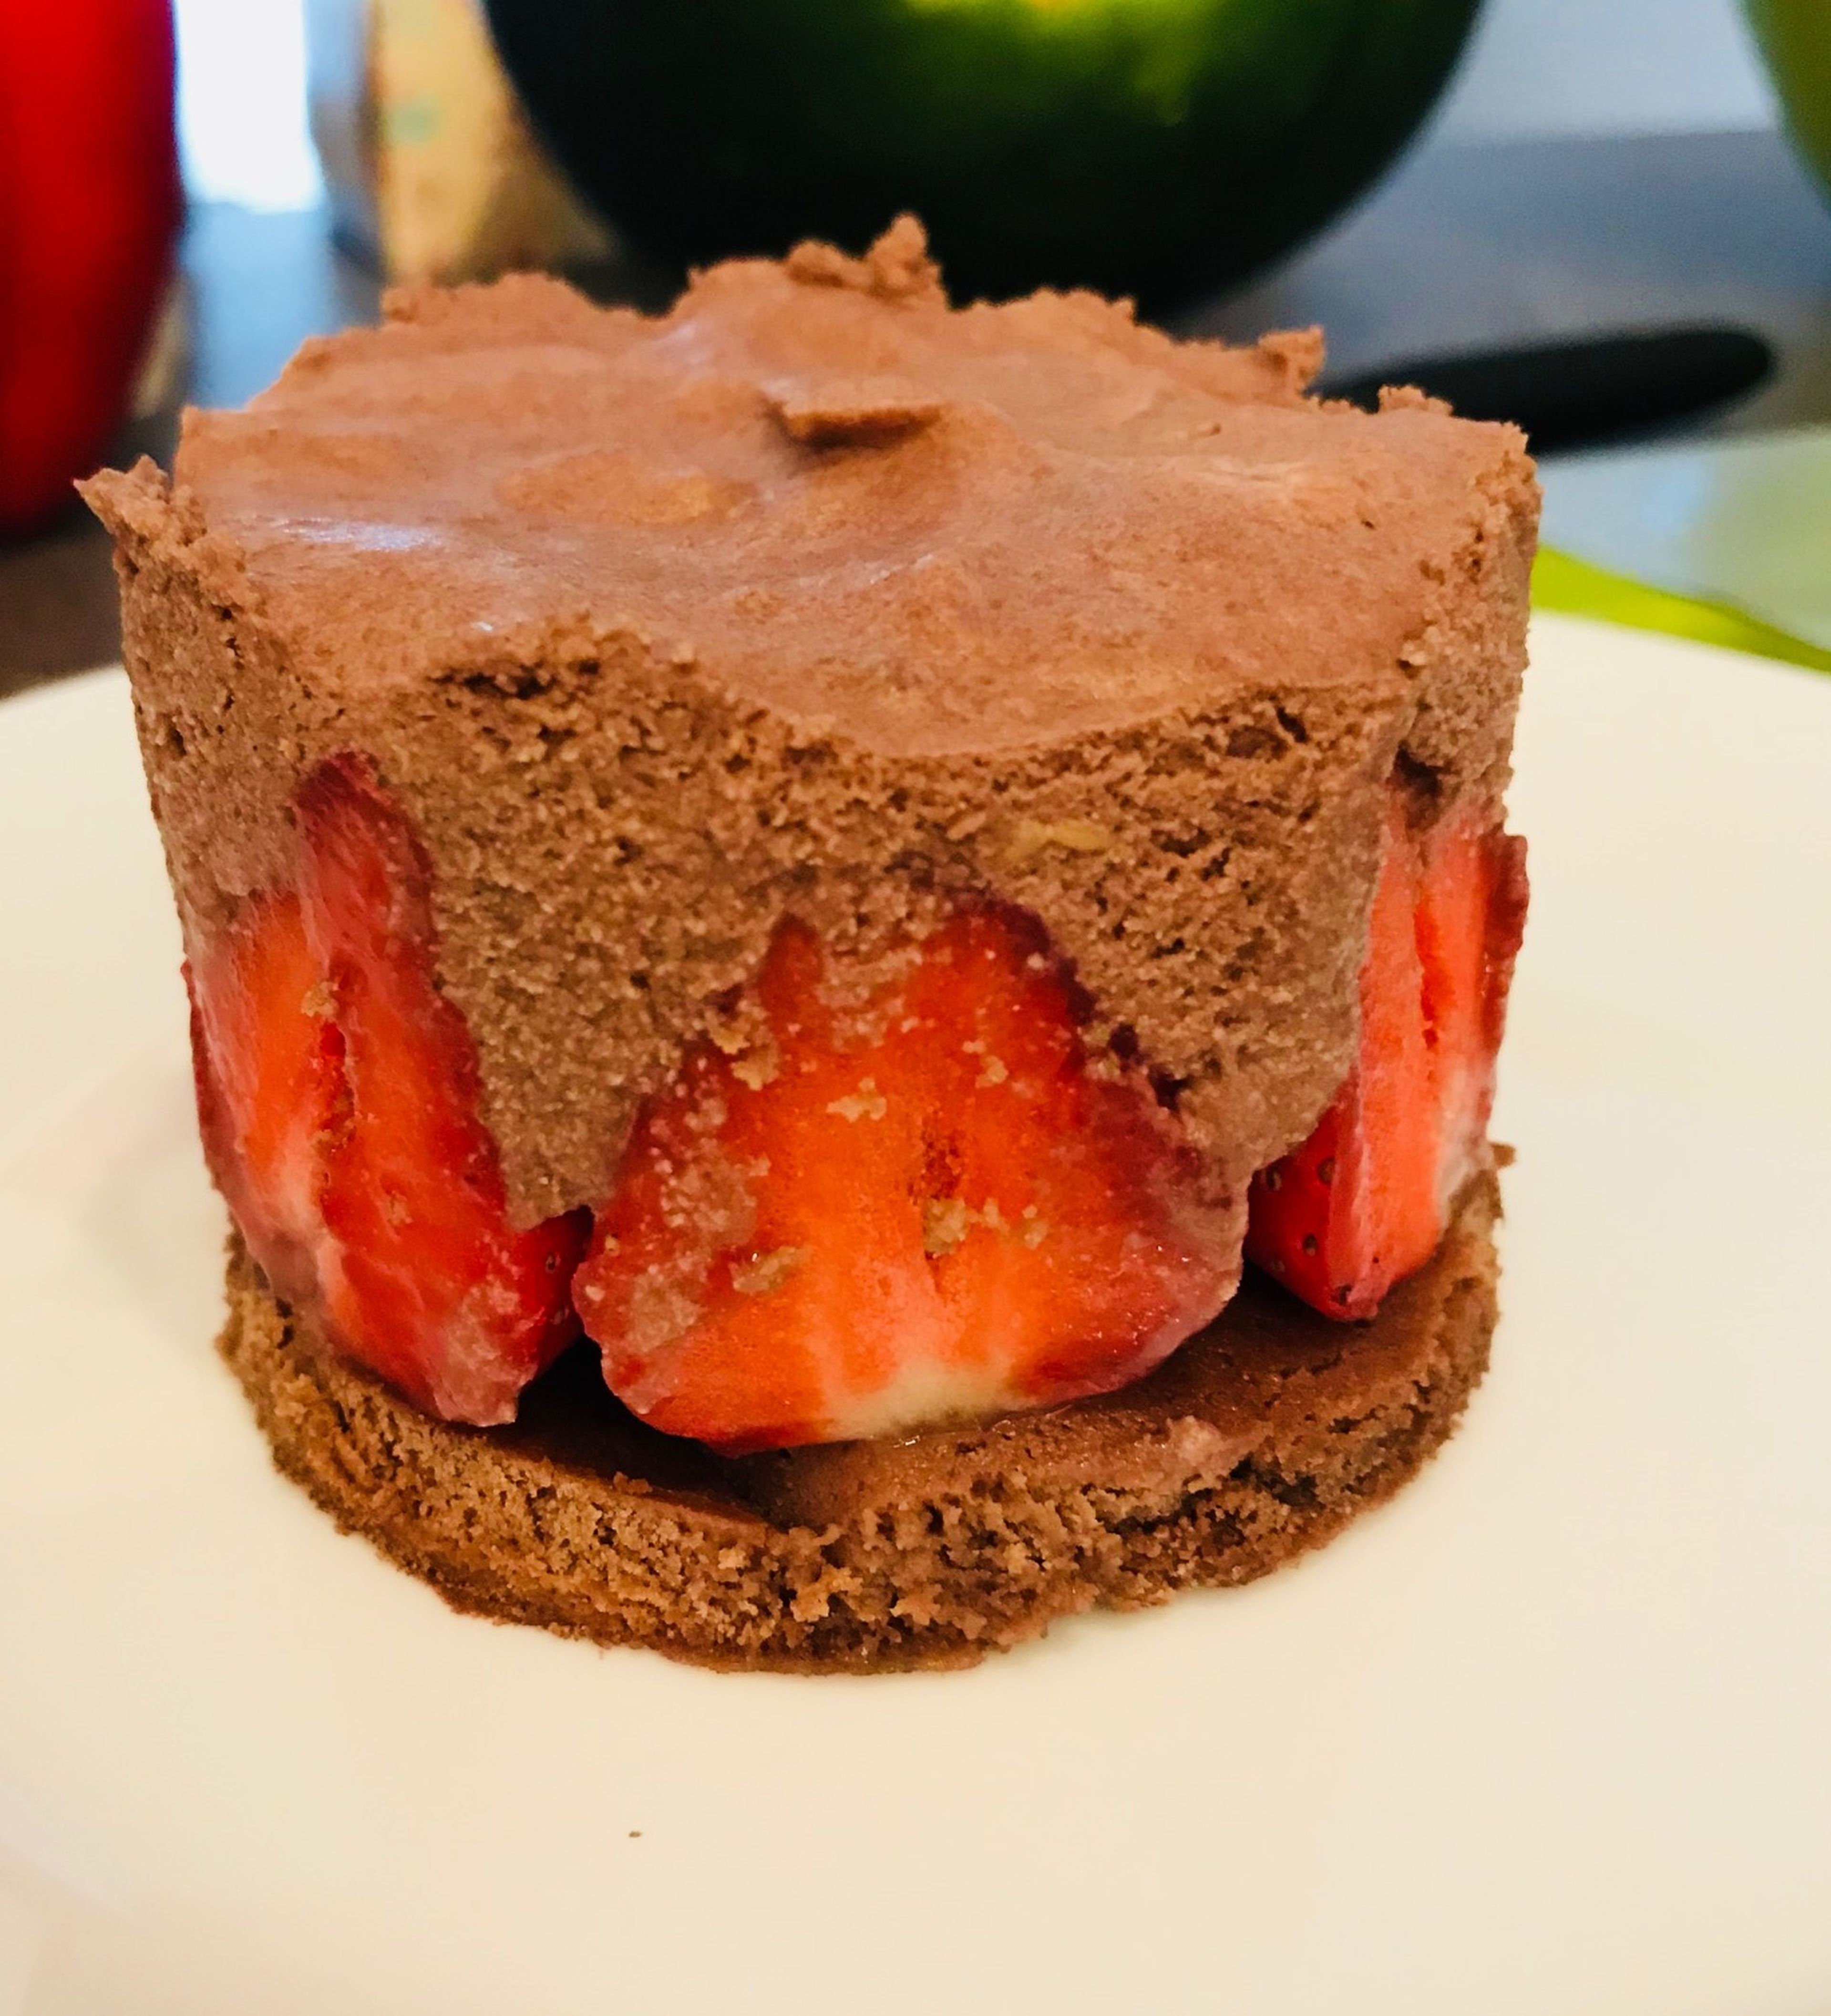 Take your brownie base and cut out circles using cake rings (approx. 6-cm/2.5-in. diameter). Wash and halve the strawberries. Line the edges inside the cake rings with strawberries facing sliced-side upwards. Carefully spread chocolate mousse on top of the strawberries. Refrigerate for approx. 4 hrs. Enjoy!